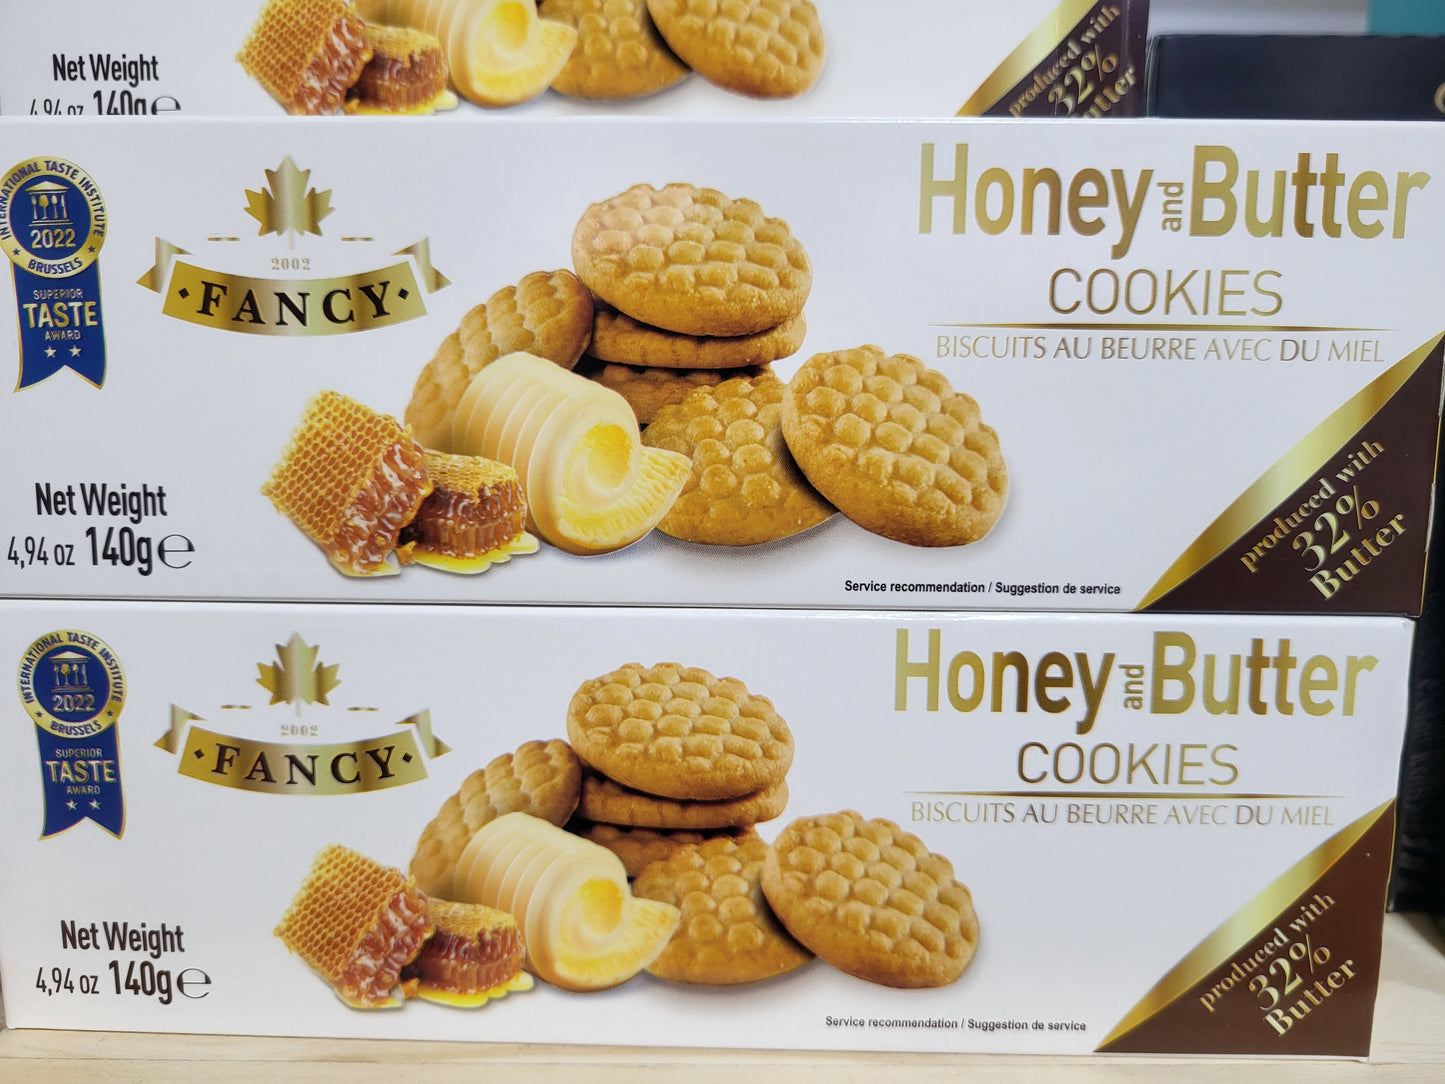 Fancy Butter Cookies with honey 140g